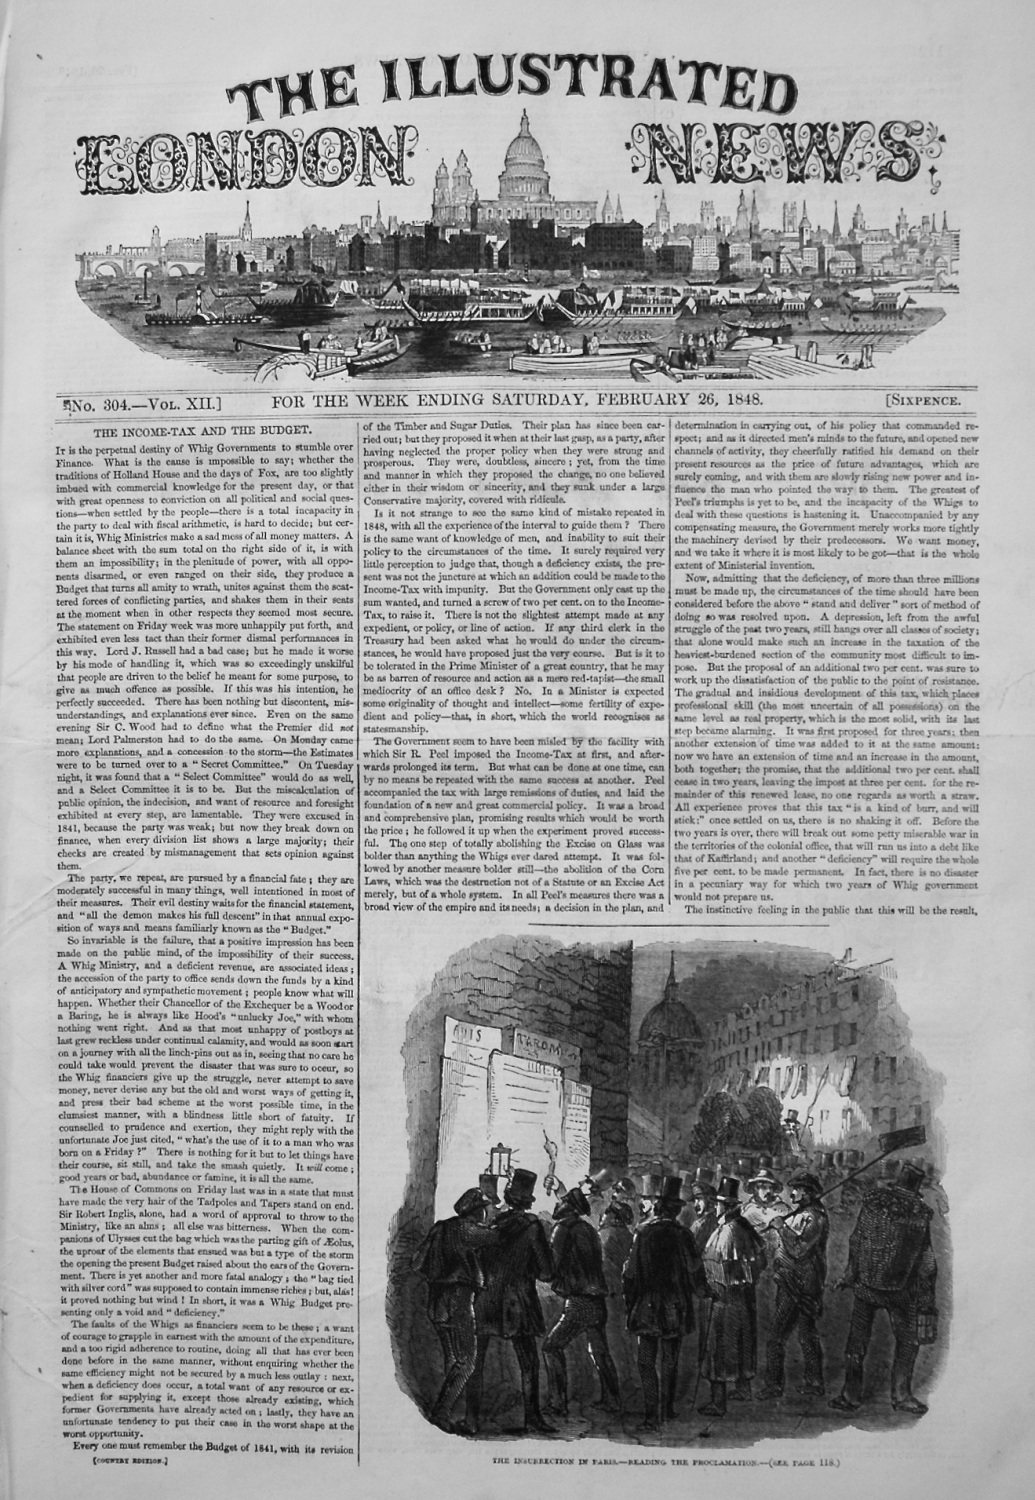 Illustrated London News. February 26th, 1848.